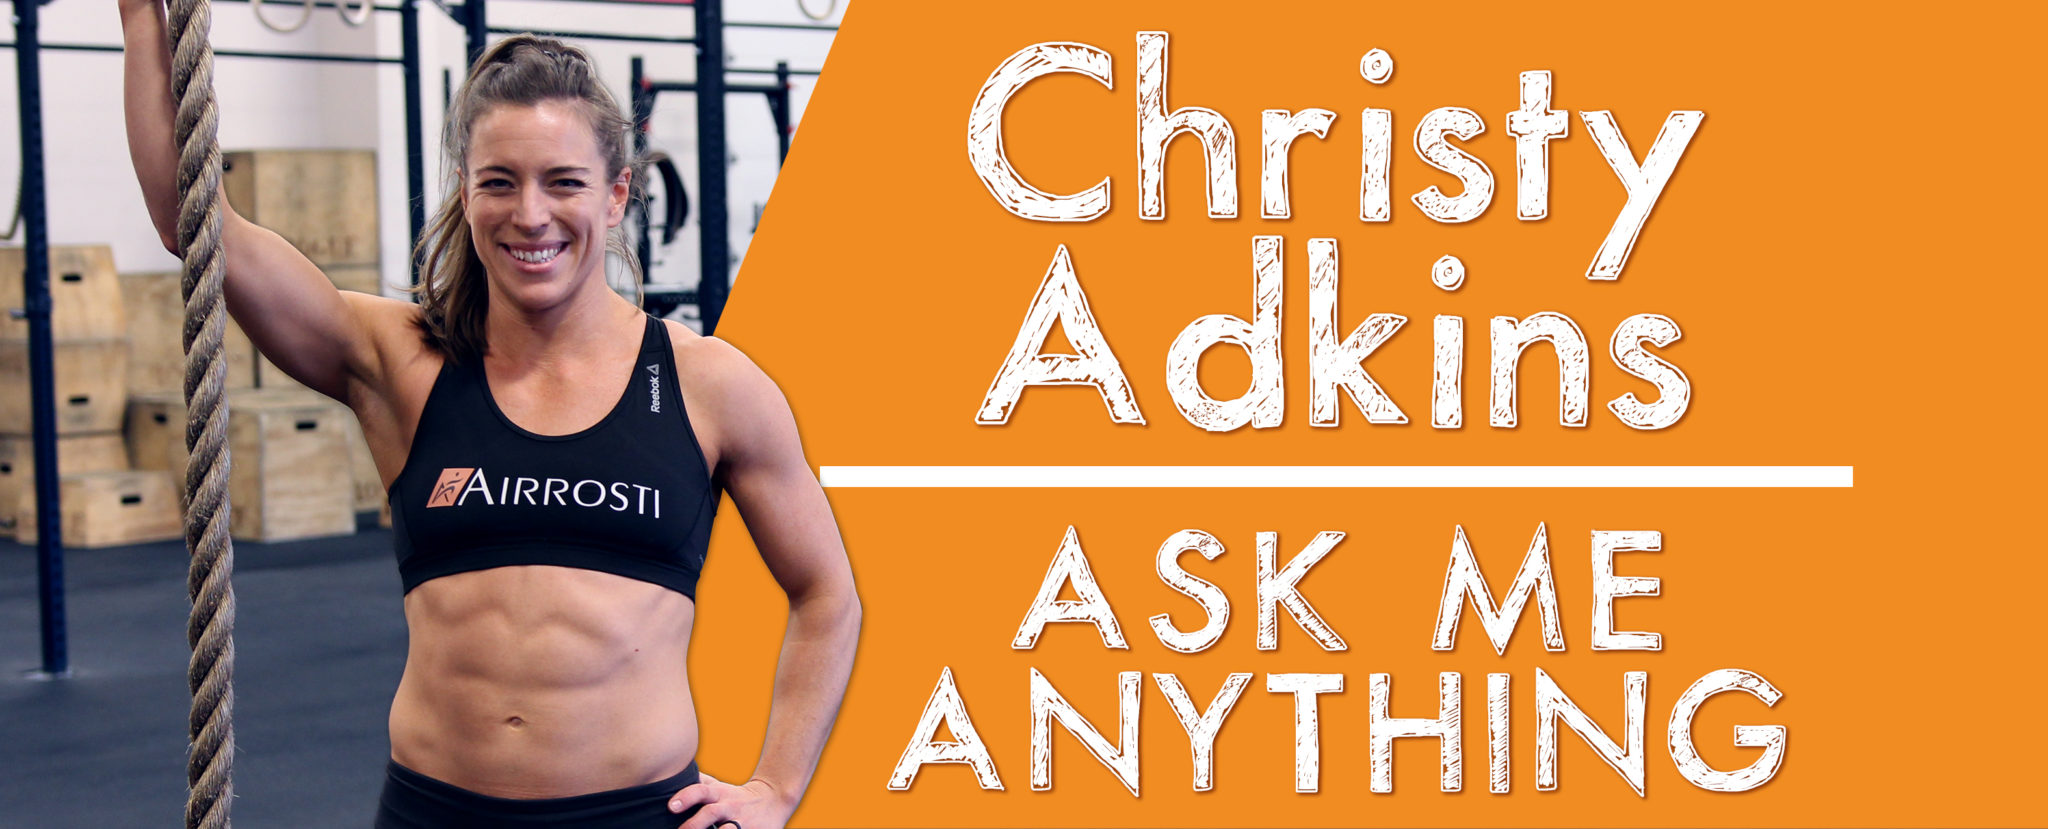 CrossFit Athlete Christy Adkins posting next to rope in CrossFit gym with text that reads "Christy Adkins Ask Me Anything"